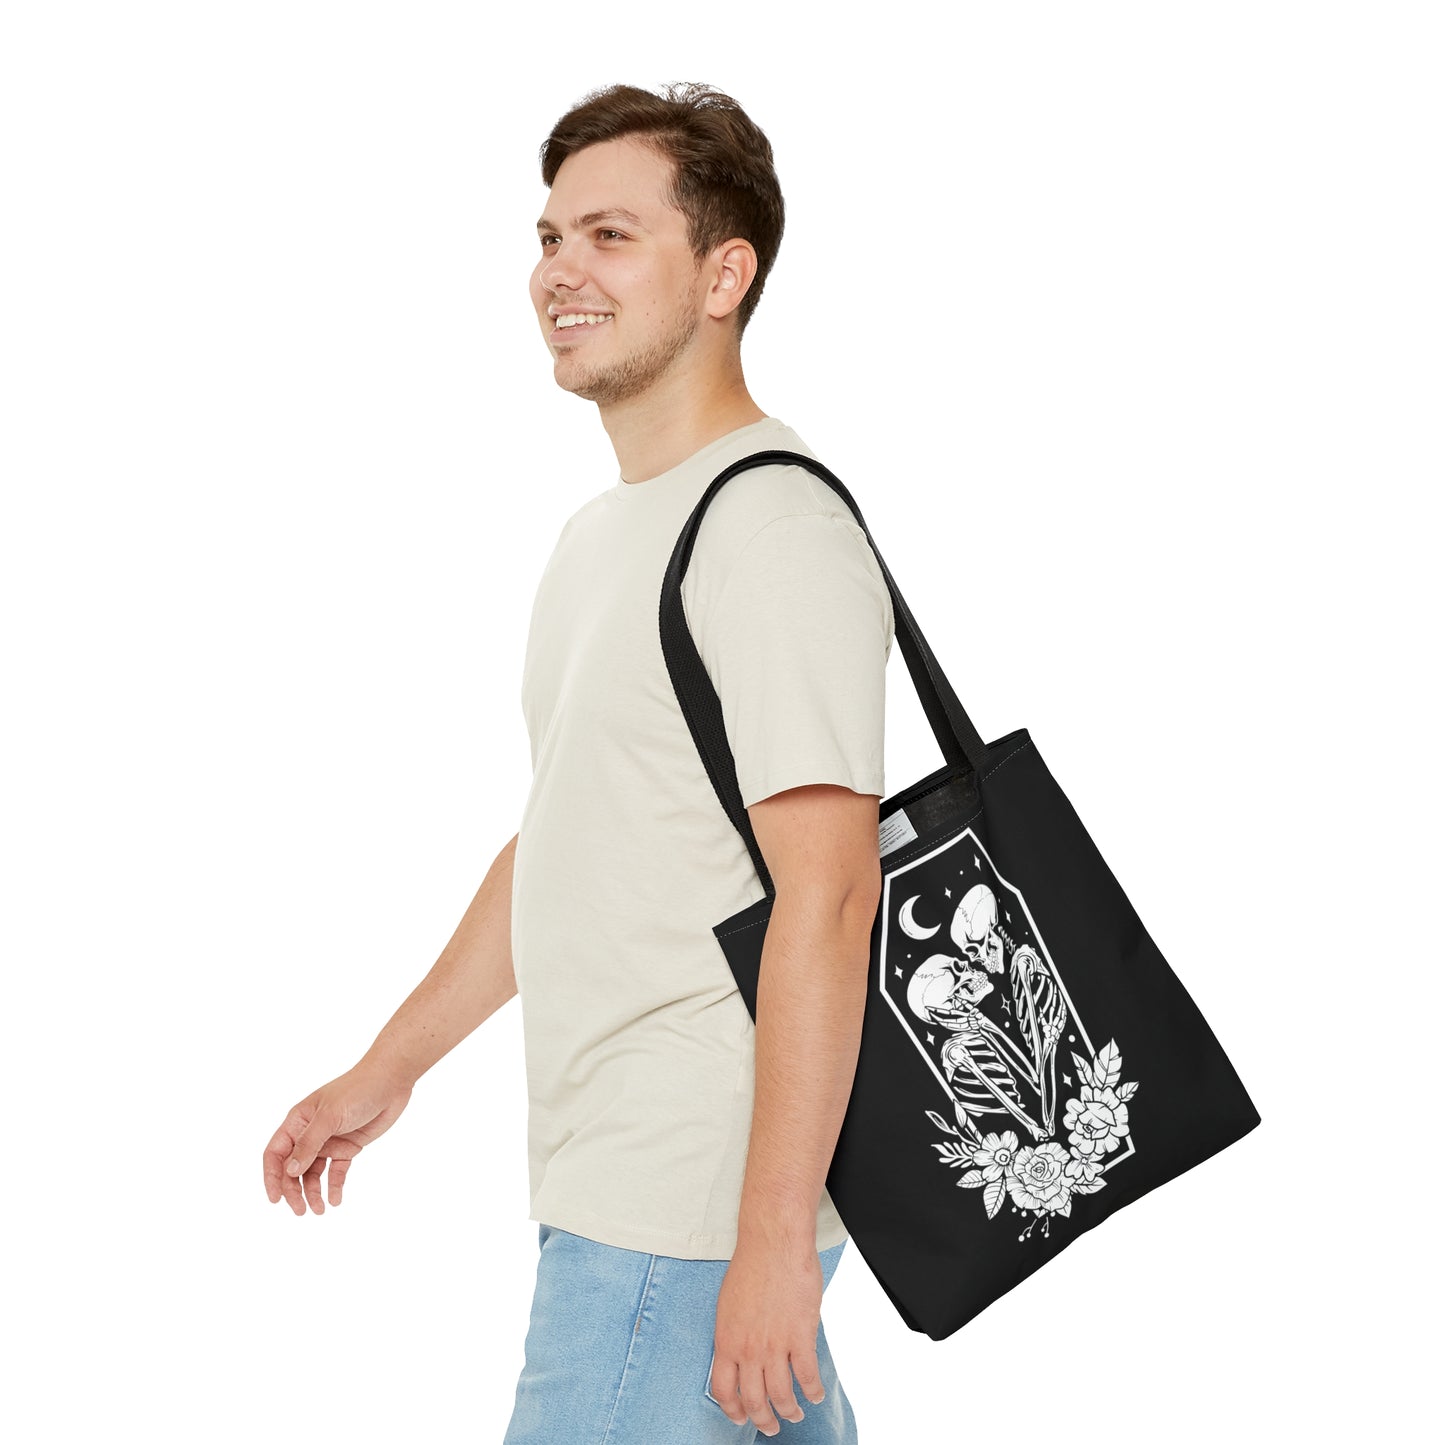 The Lovers Coffin Tote Bag